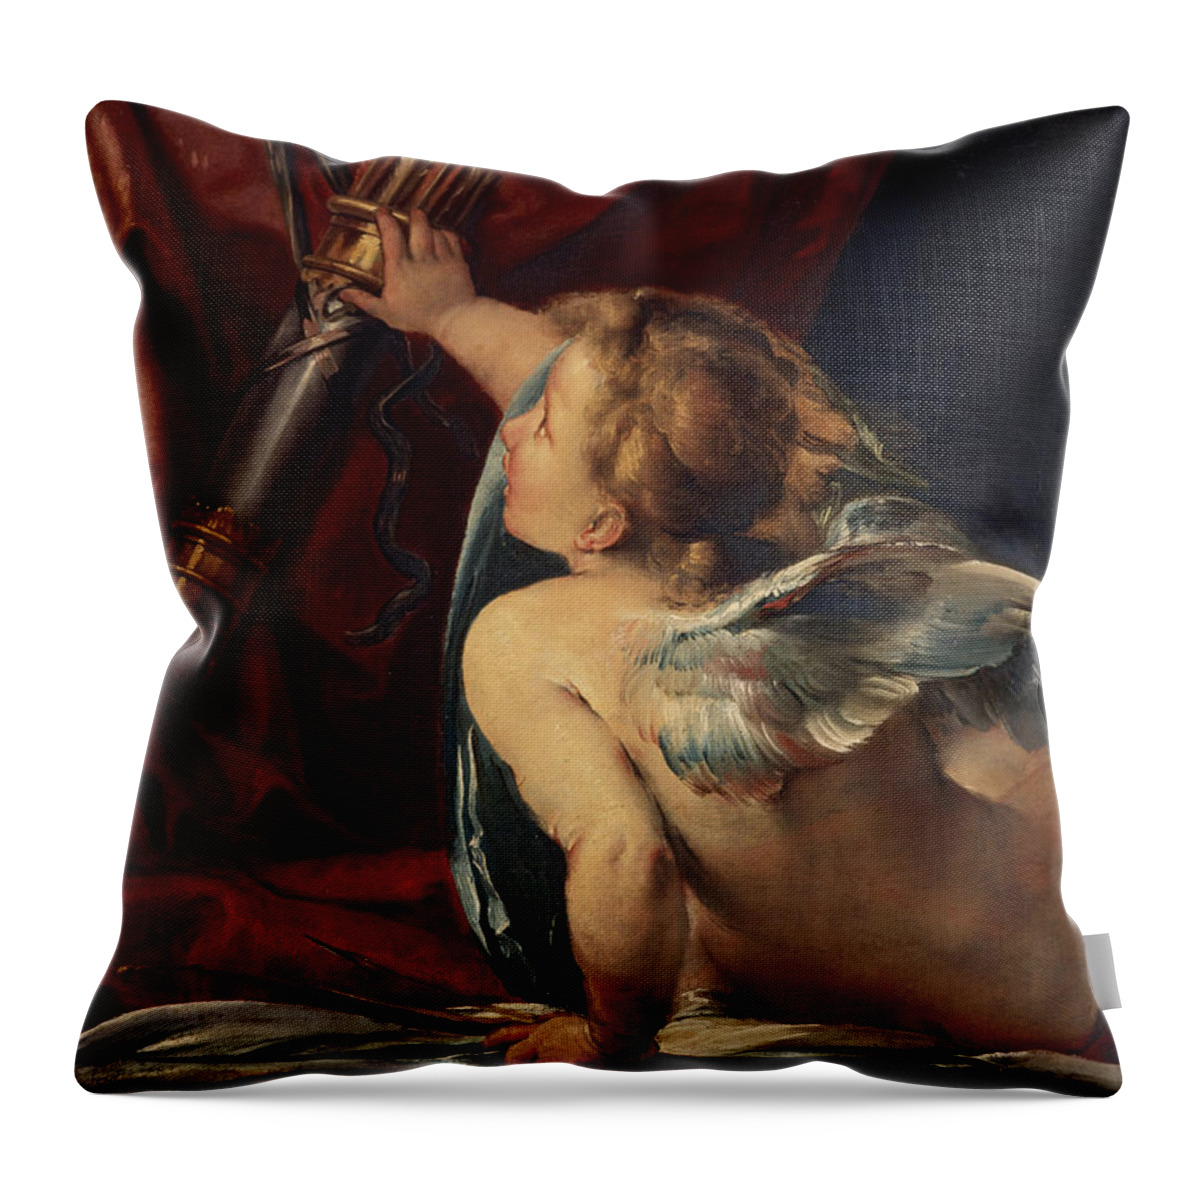 Giulio Throw Pillow featuring the painting Cupid by Giulio Cesare Procaccini